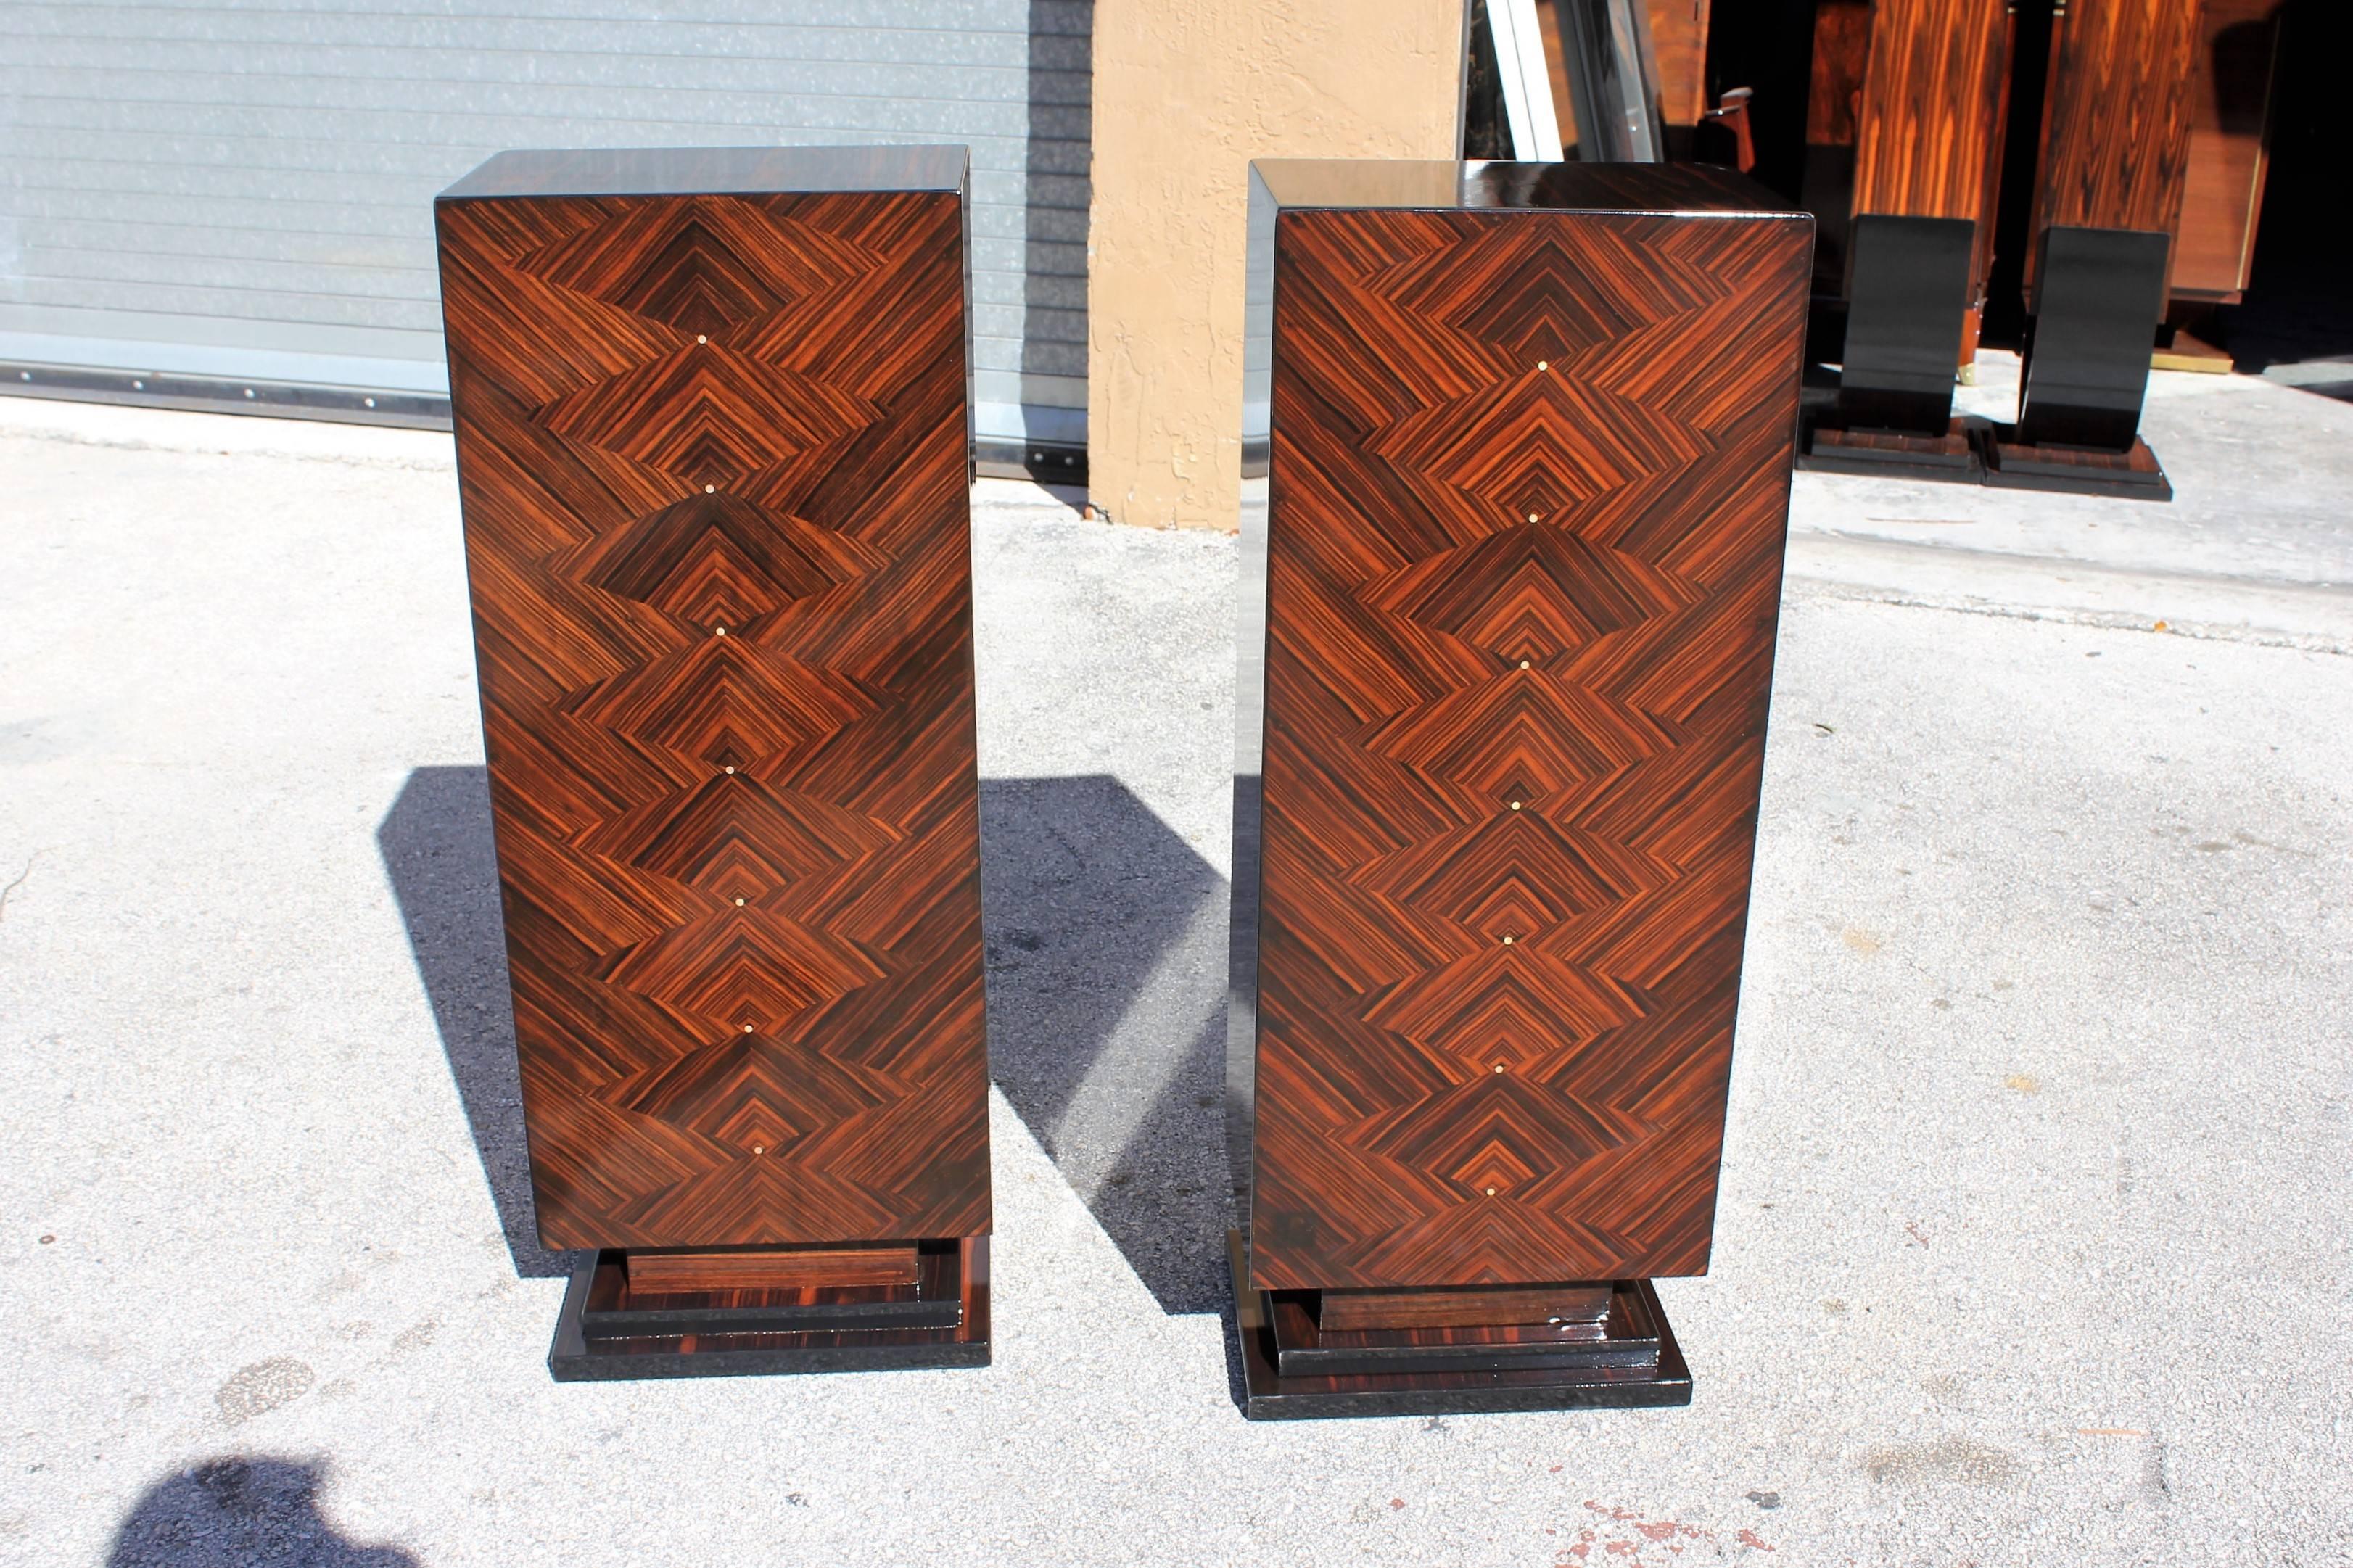 Stunning pair of French Art Deco exotic Macassar ebony pedestals, circa 1940s, we are currently liquidating the contents of. These pedestals are finished on all sides. Square base, mother-of-pearl accents in the center. These pedestals are stunning.